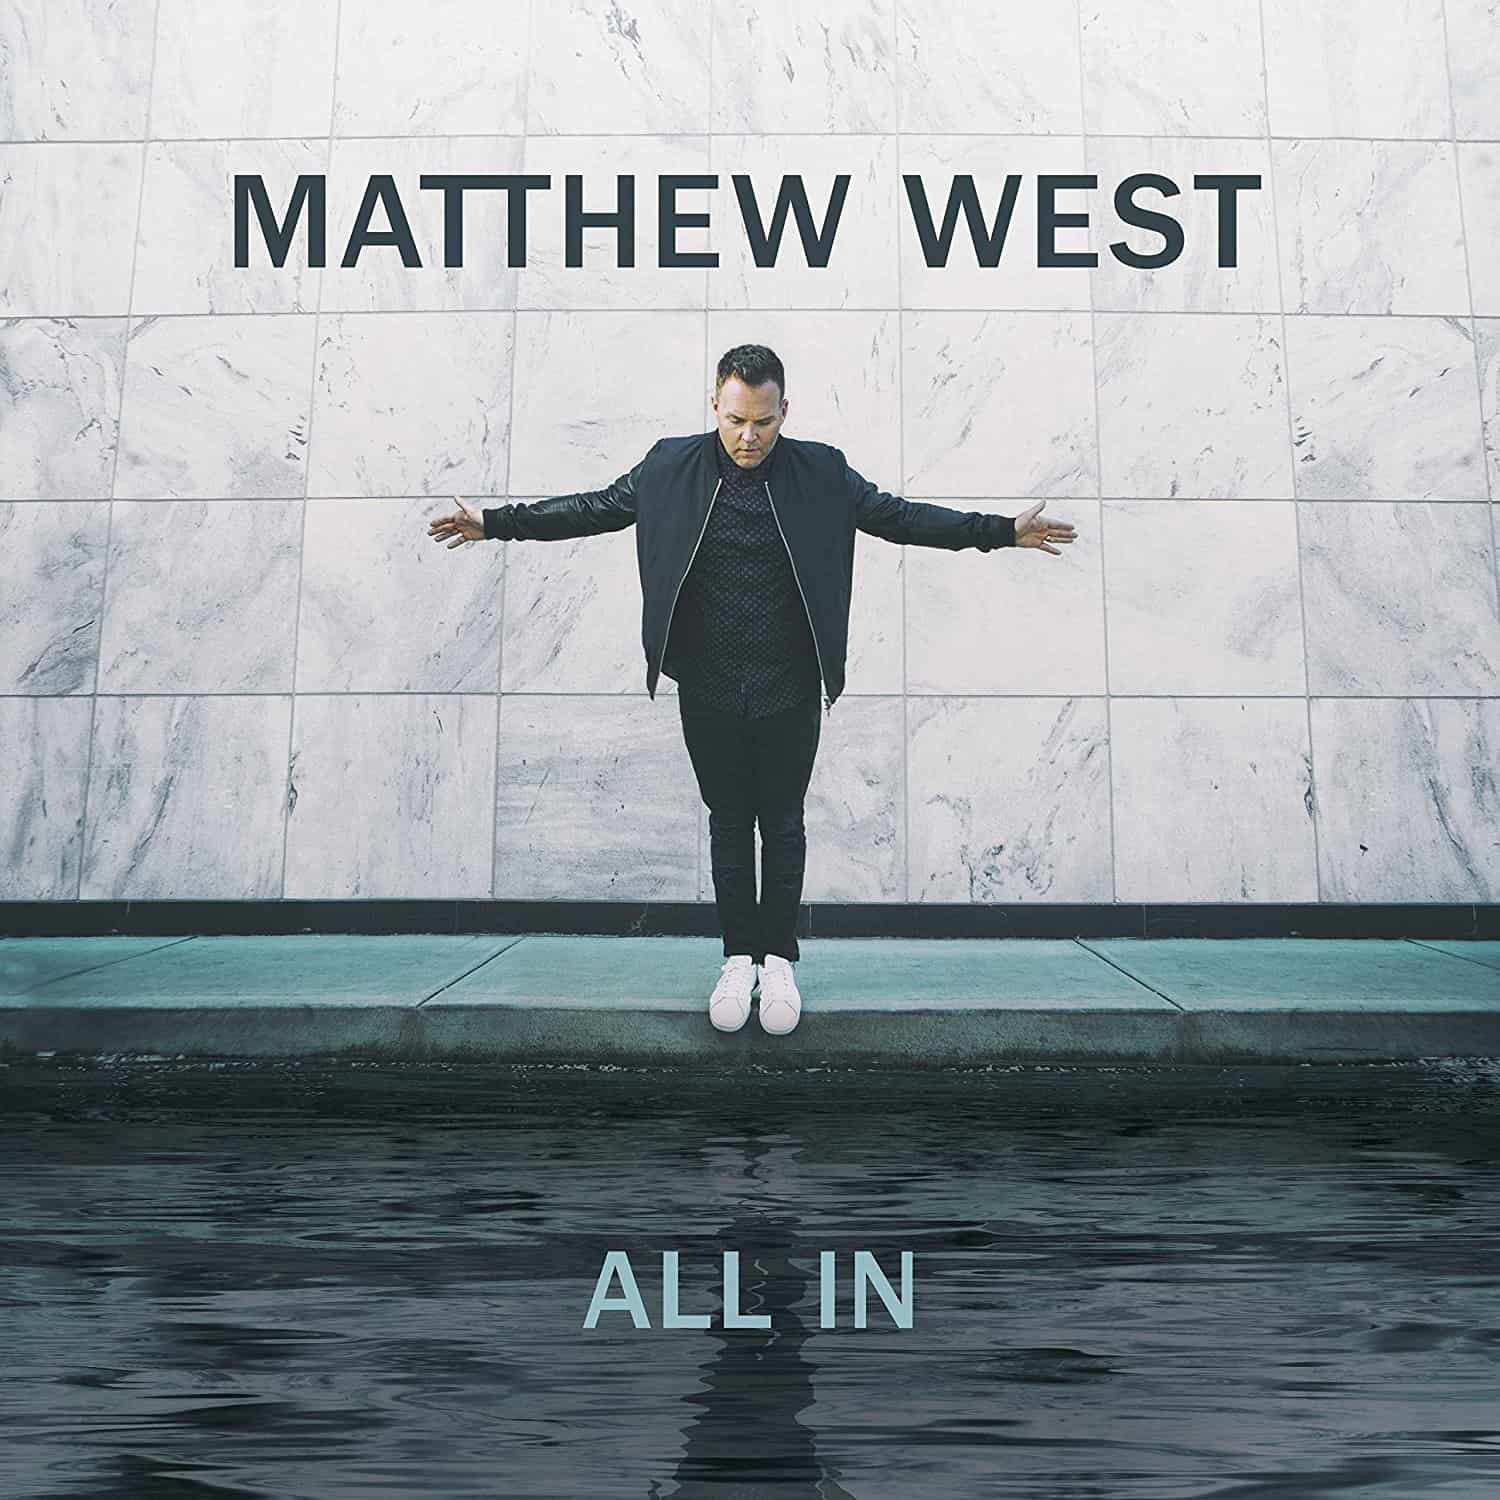 Matthew West All In CD is Now Available